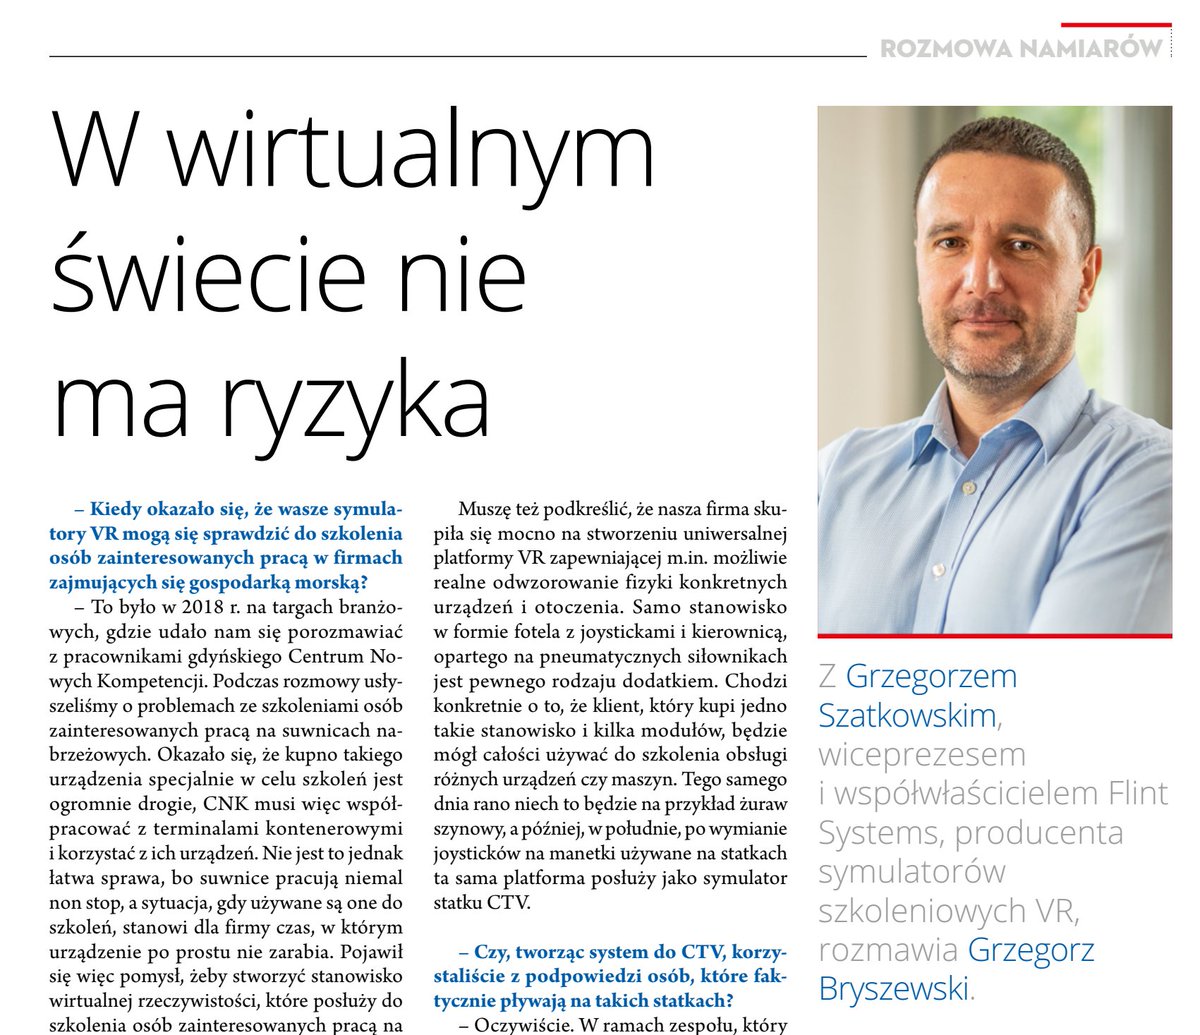 Have you already read the latest issue of 'Namiary na Morze i Handel'? We highly recommend it, as it includes an interview with Grzegorz Szatkowski, the Vice President of the Board of Flint Systems. #maritime #maritimeindustry #vr #vrtraining #maritimetraining #interview